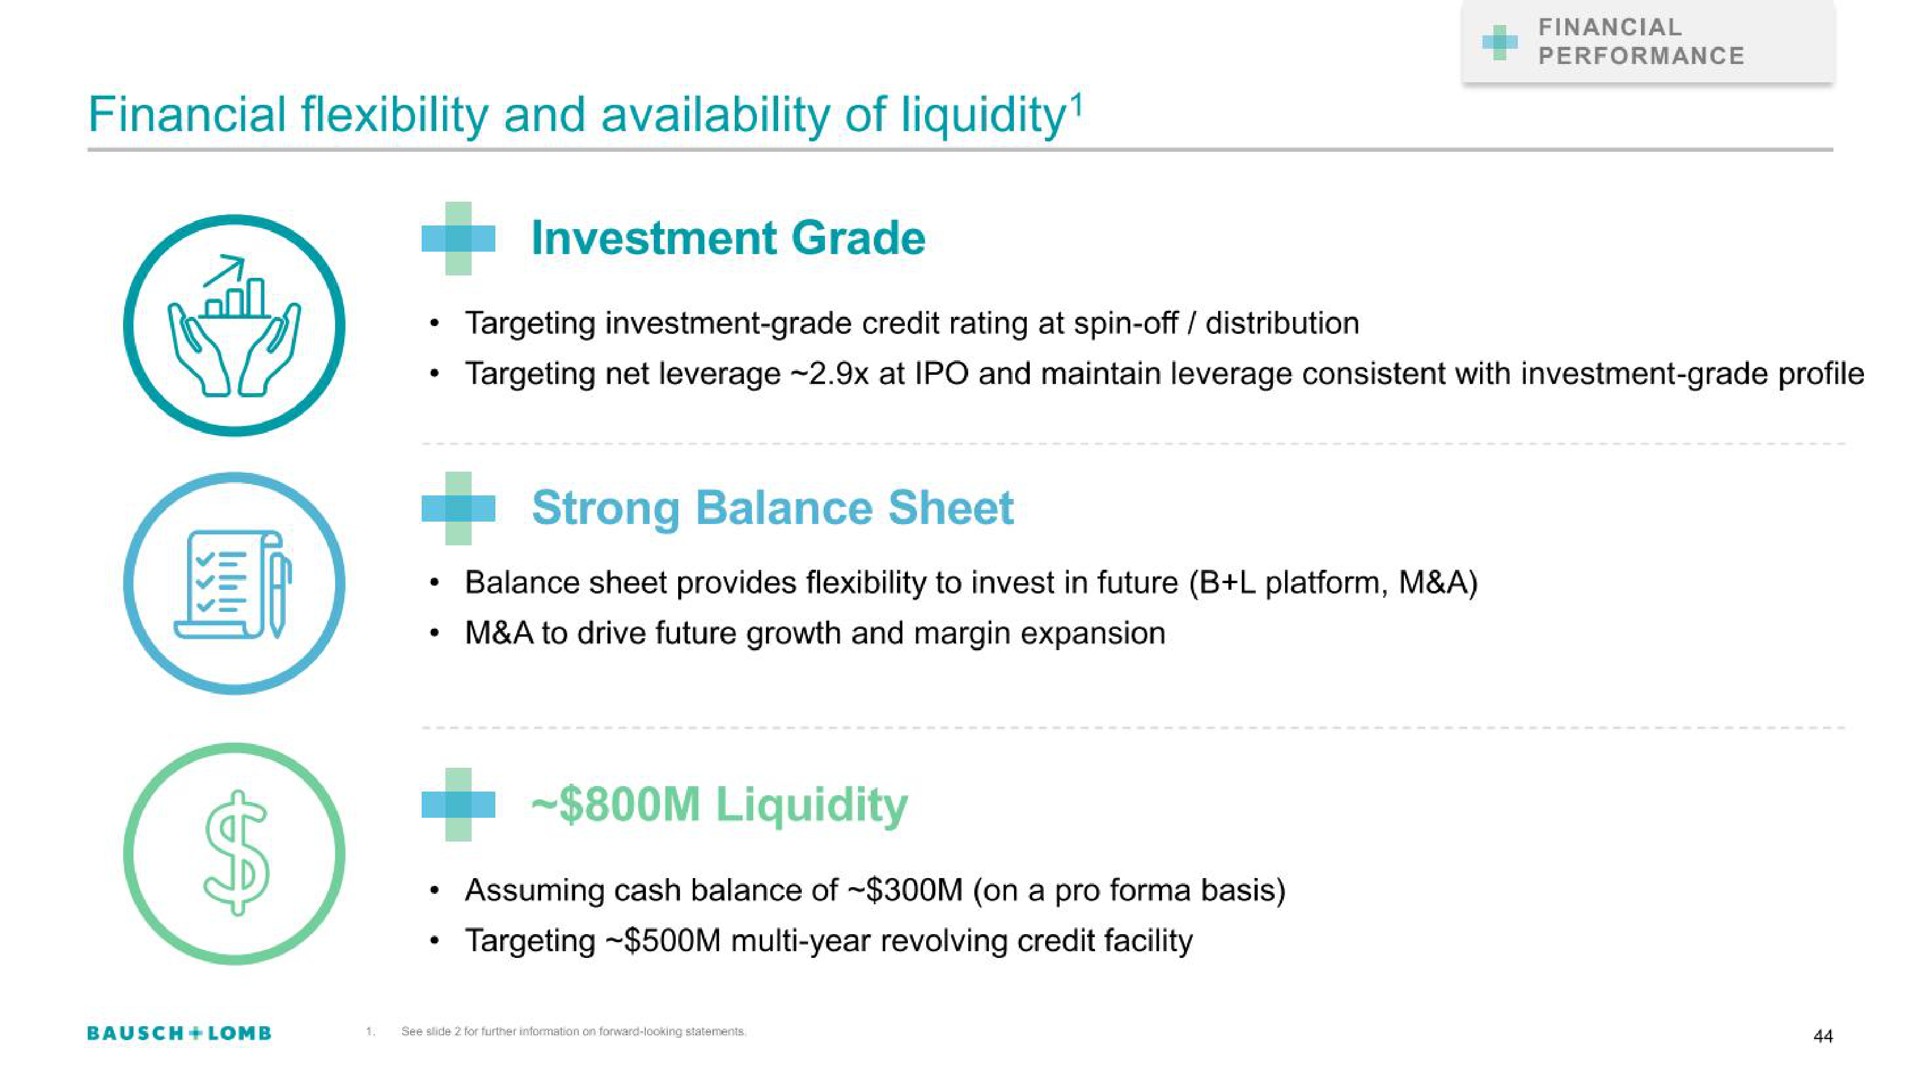 financial flexibility and availability of liquidity strong balance sheet liquidity | Bausch+Lomb